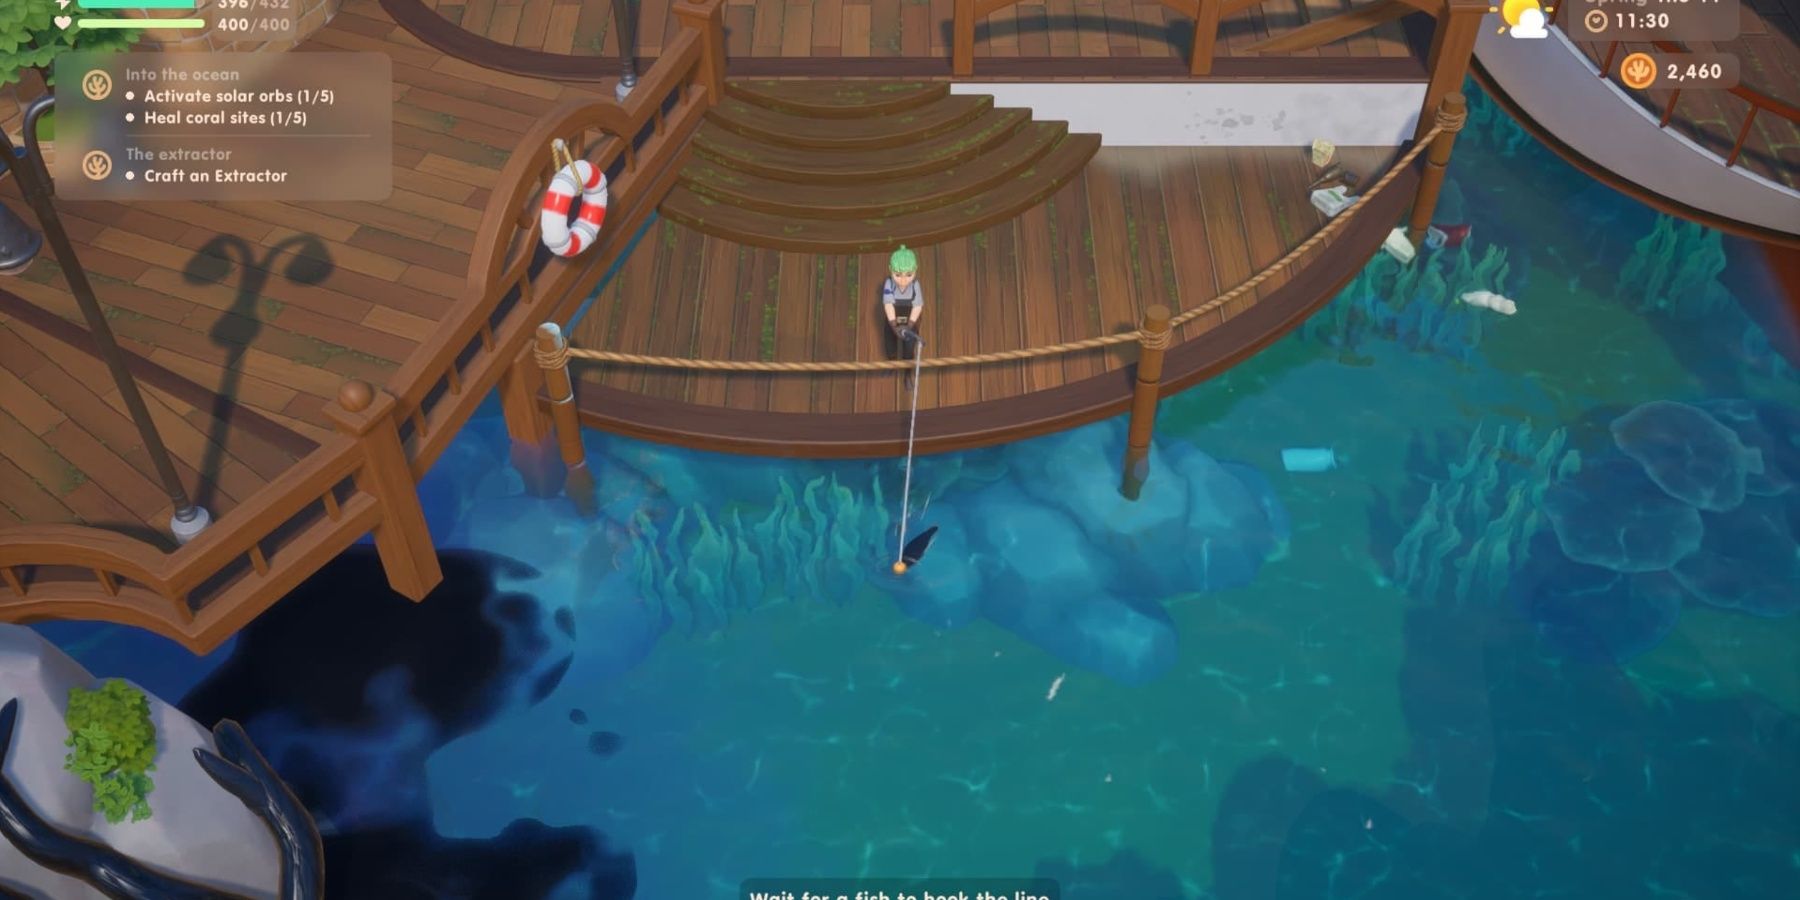 The player fishing from a wooden dock in Coral Island